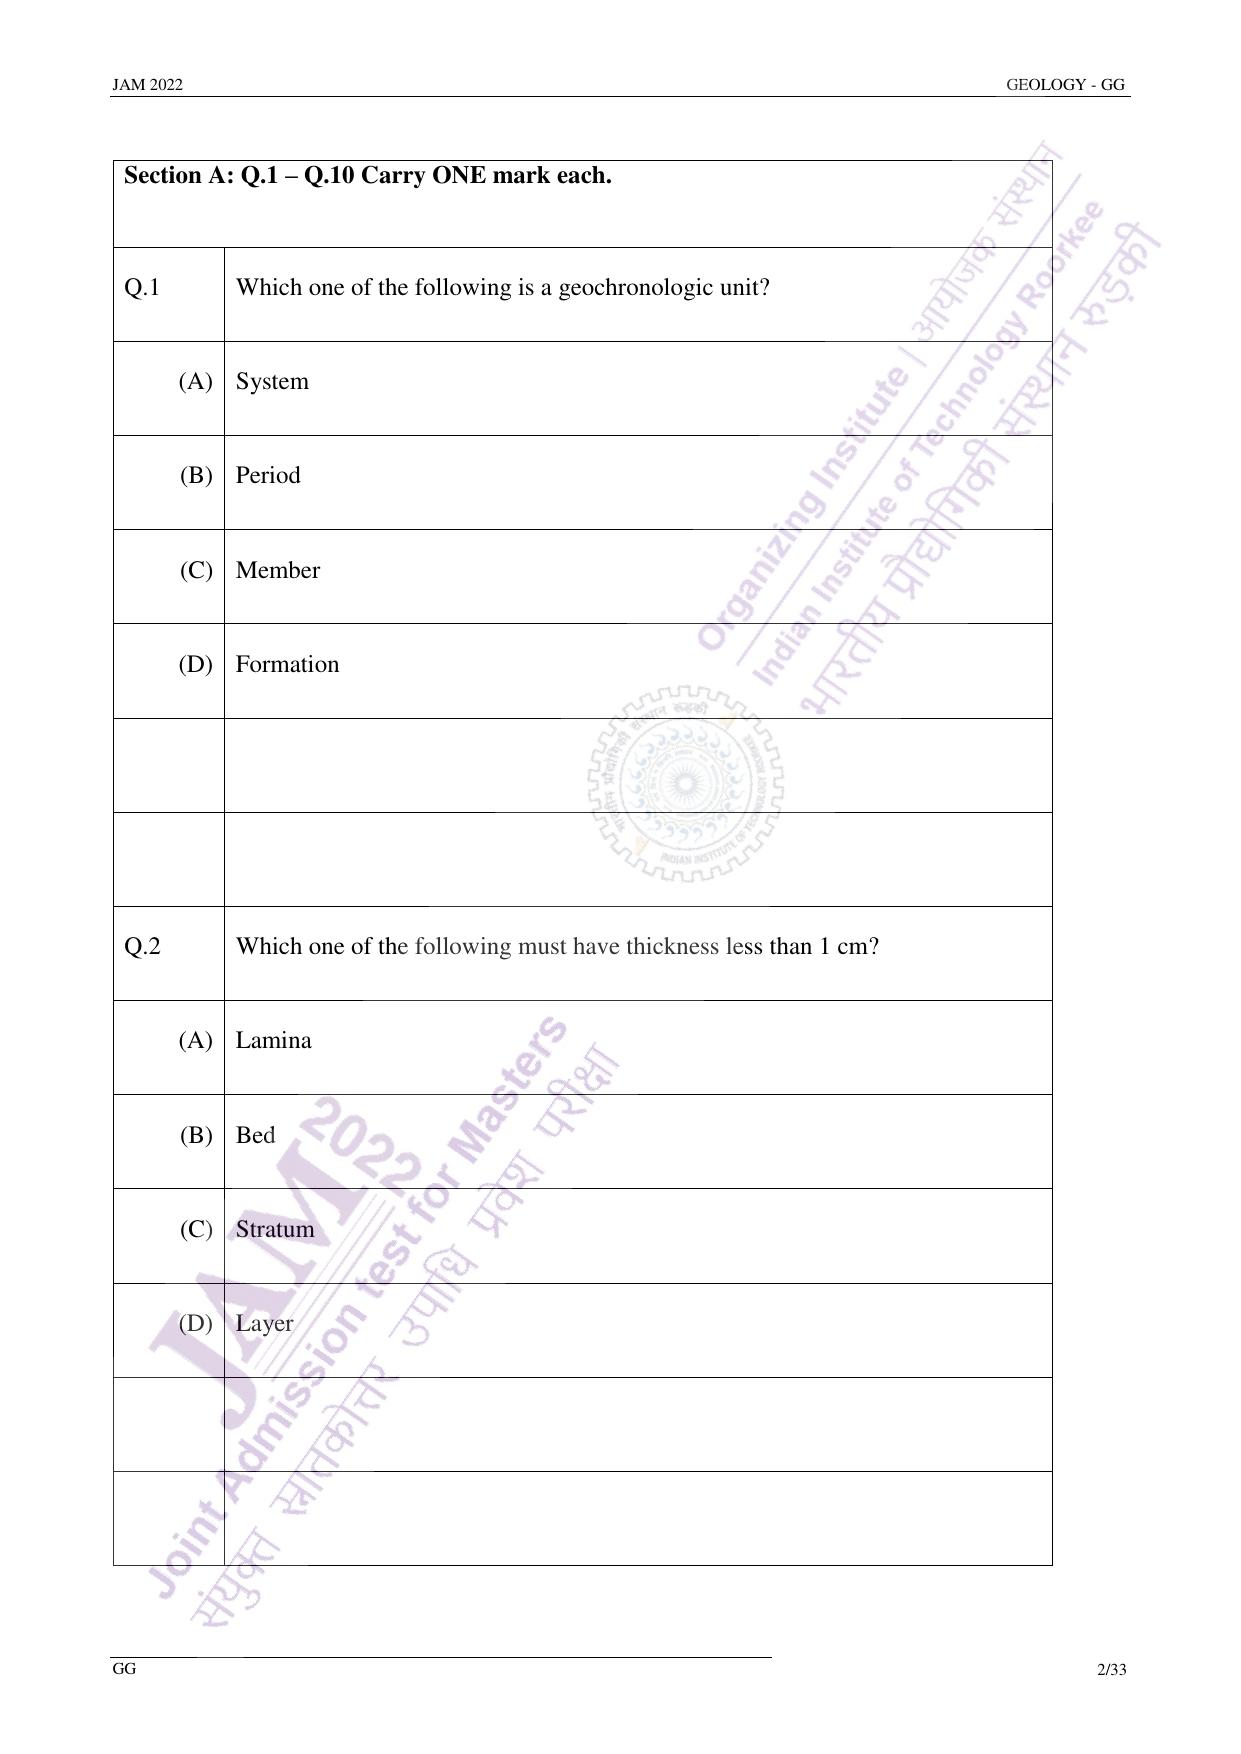 JAM 2022: GG Question Paper - Page 1